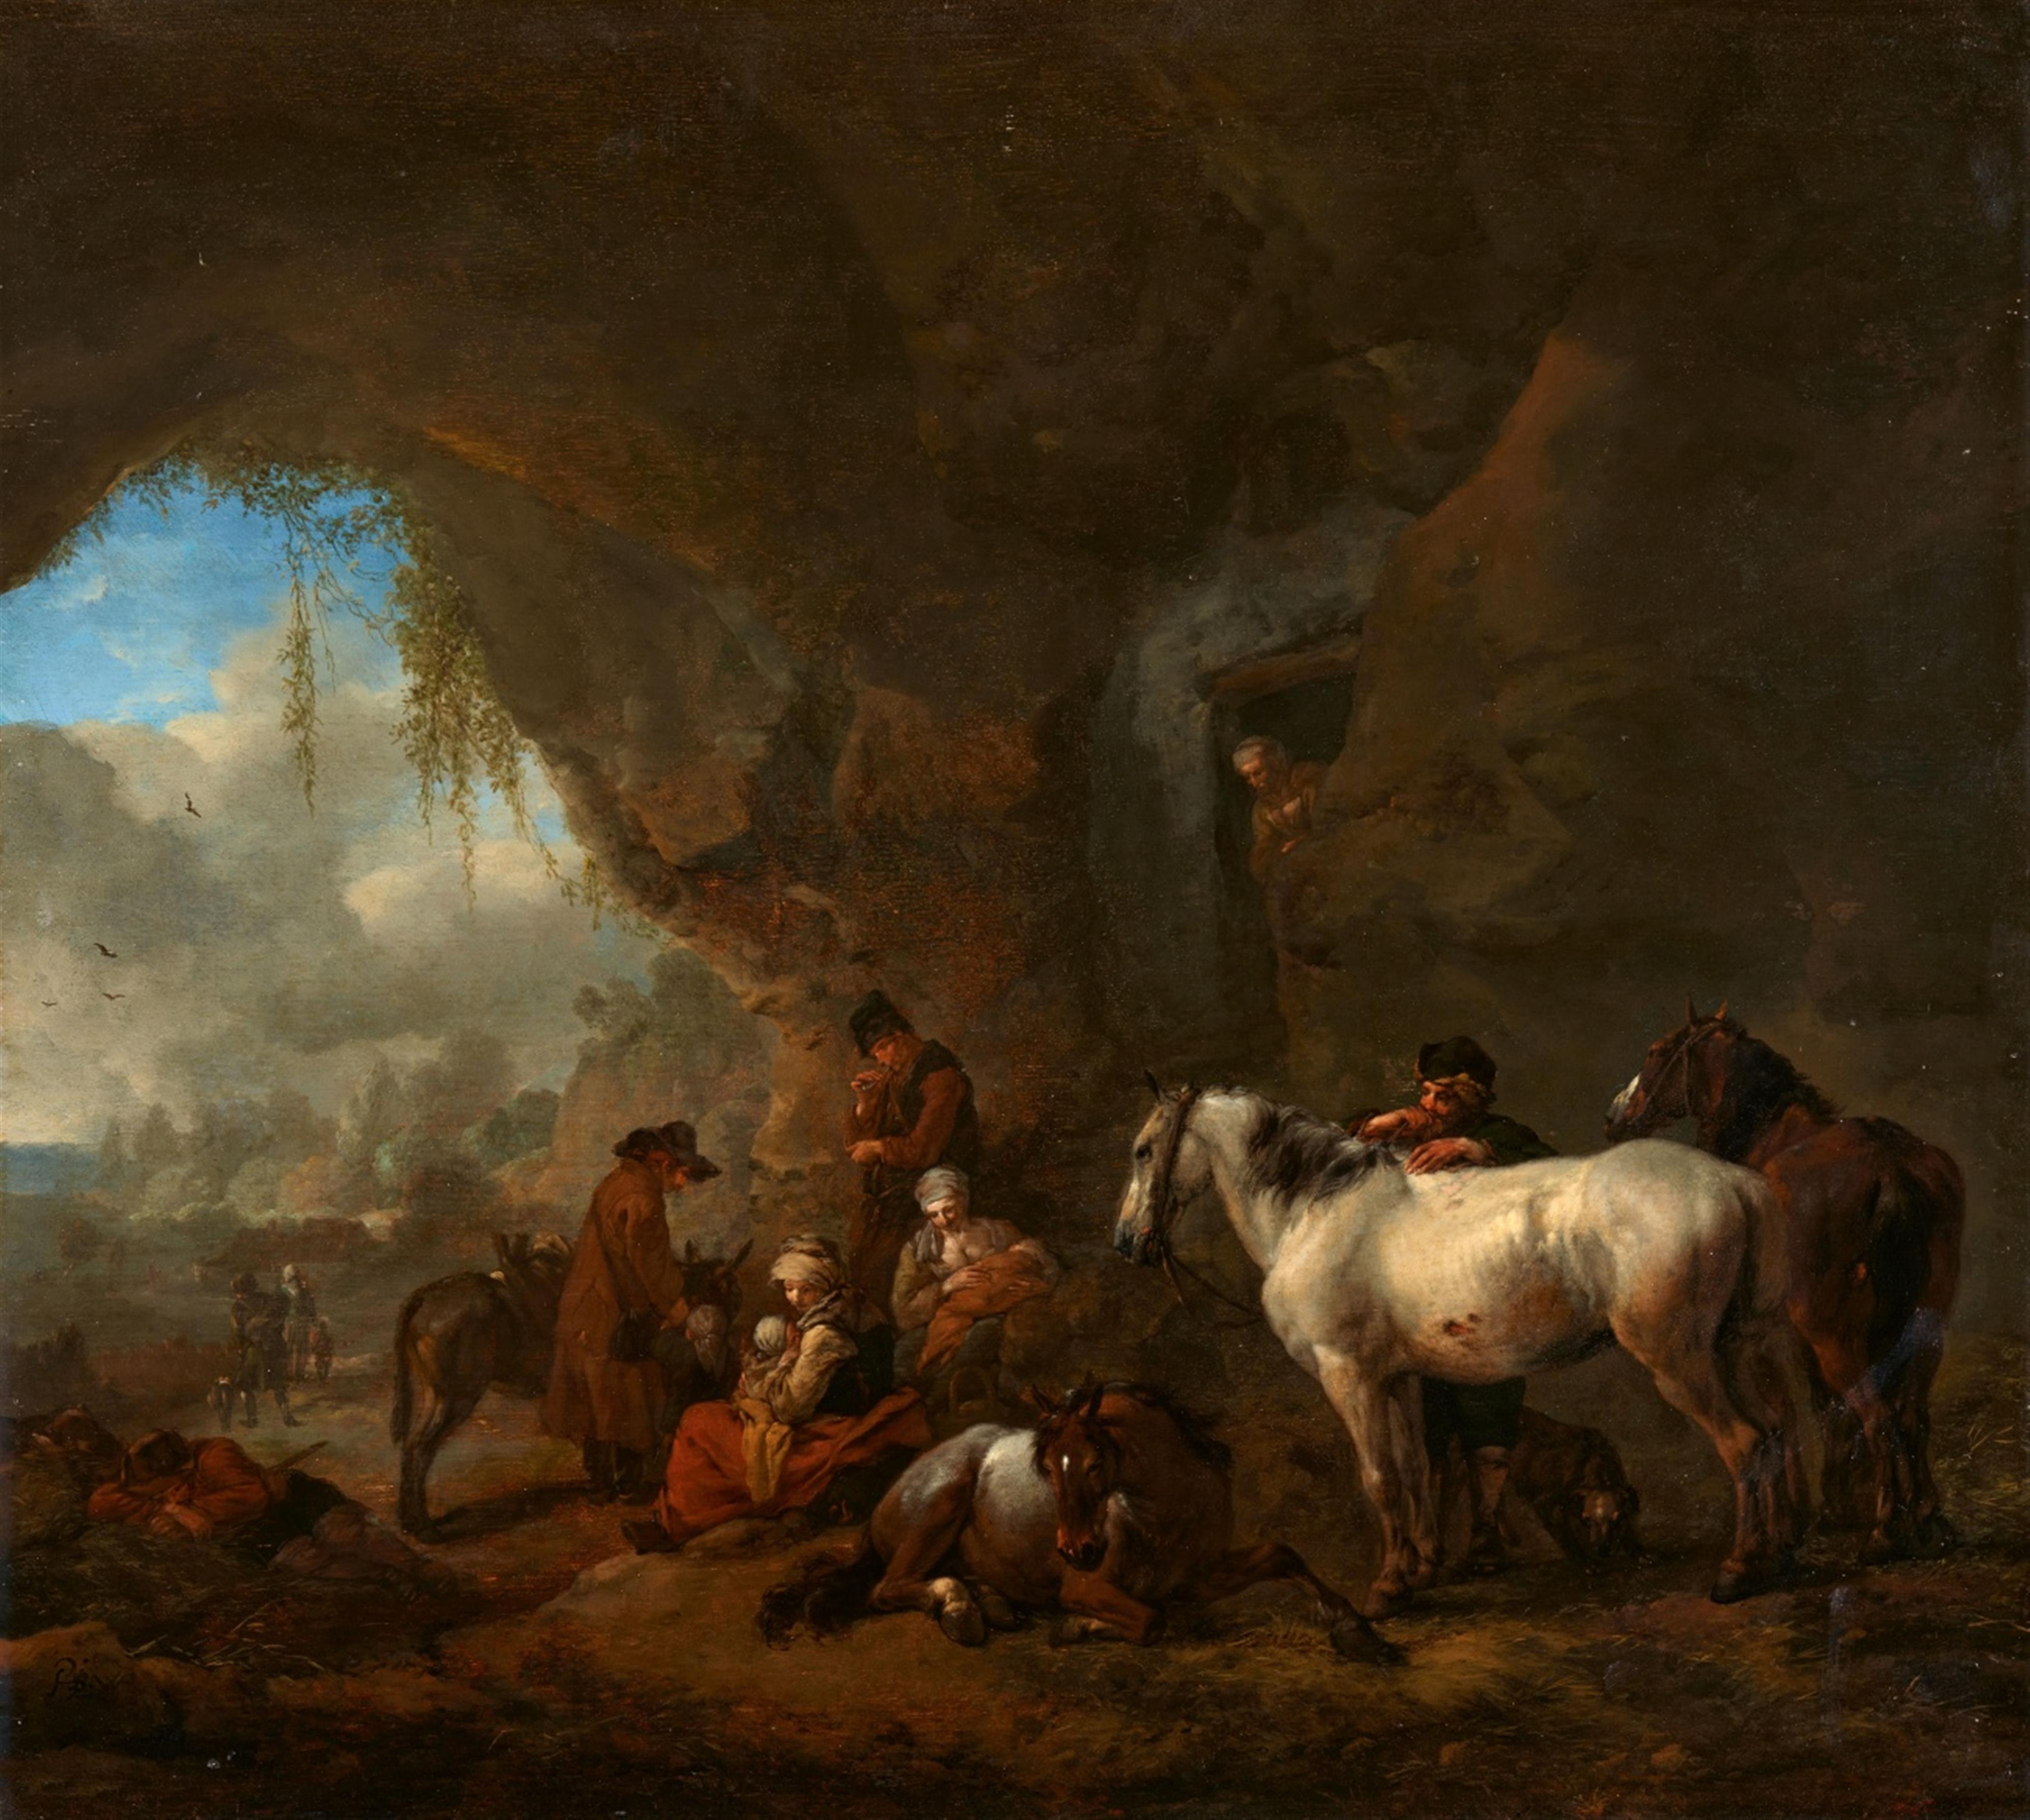 Philips Wouwerman - Travellers Resting in a Grotto - image-1